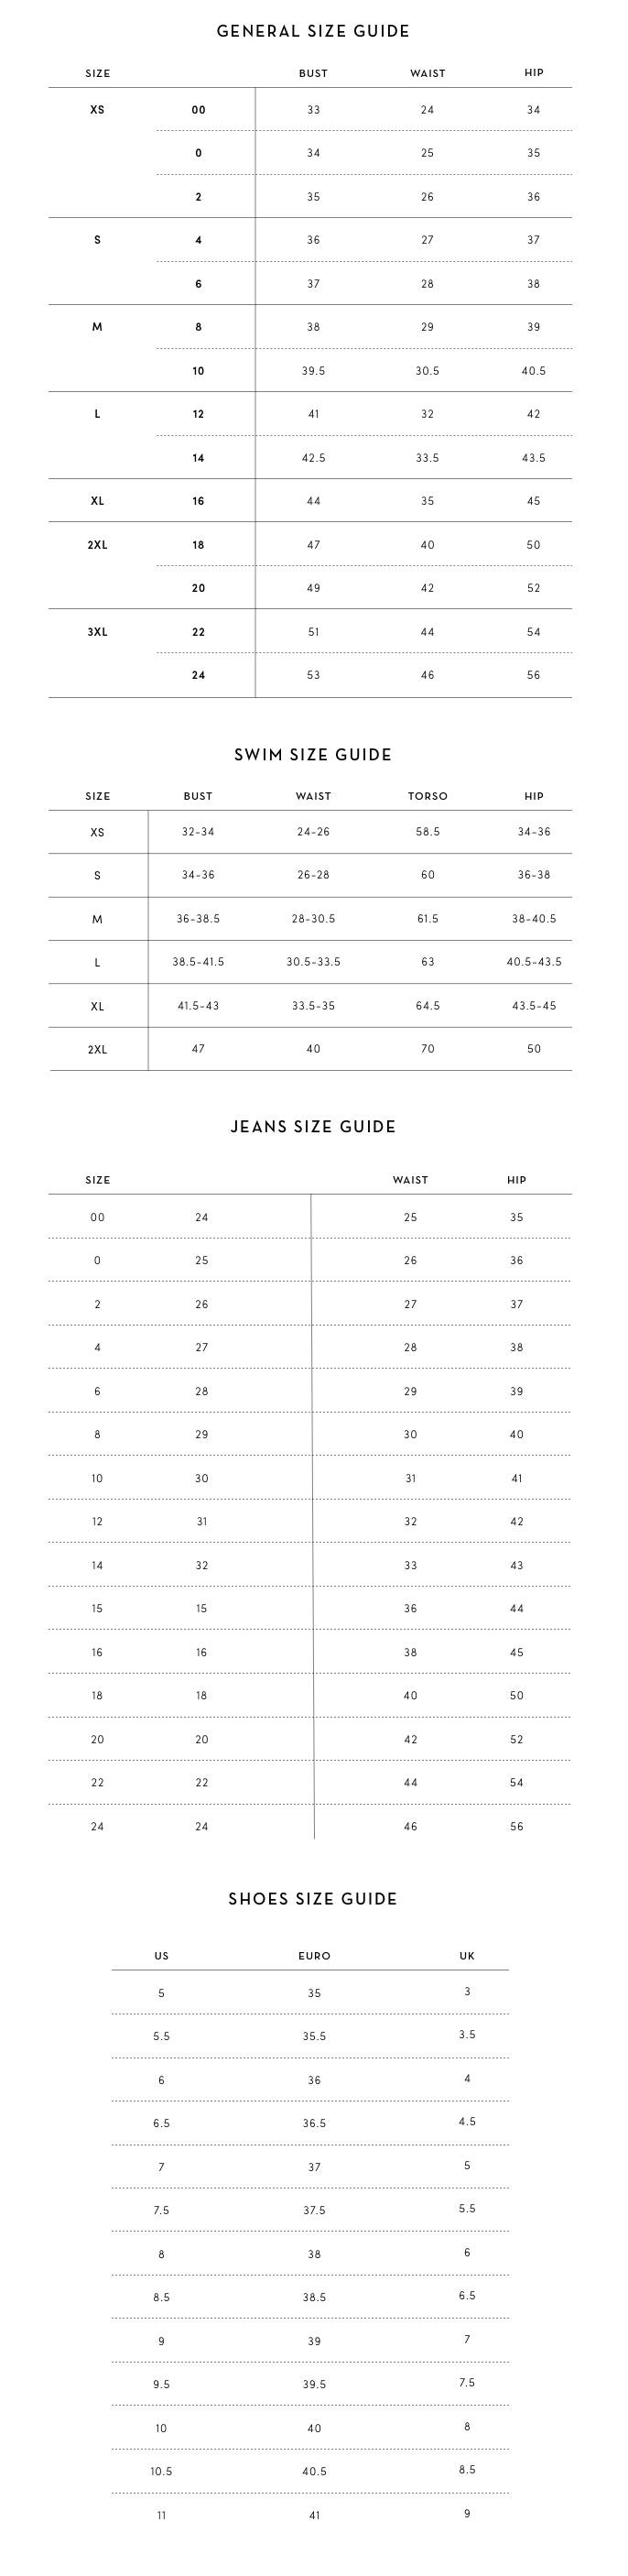 g star jeans size chart